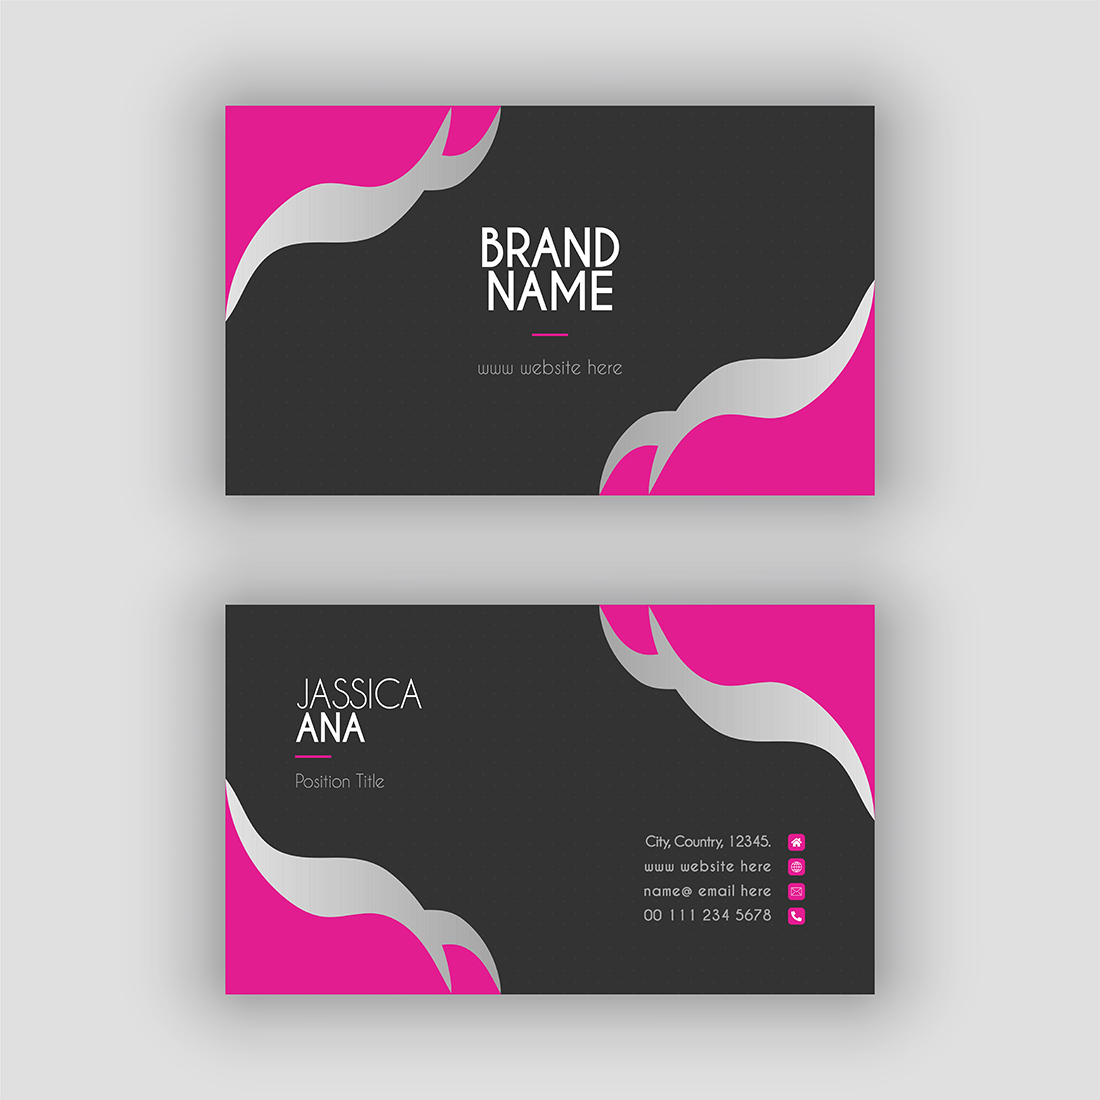 beauty minimal luxury woman business card design template for fashion and lifestyle 237